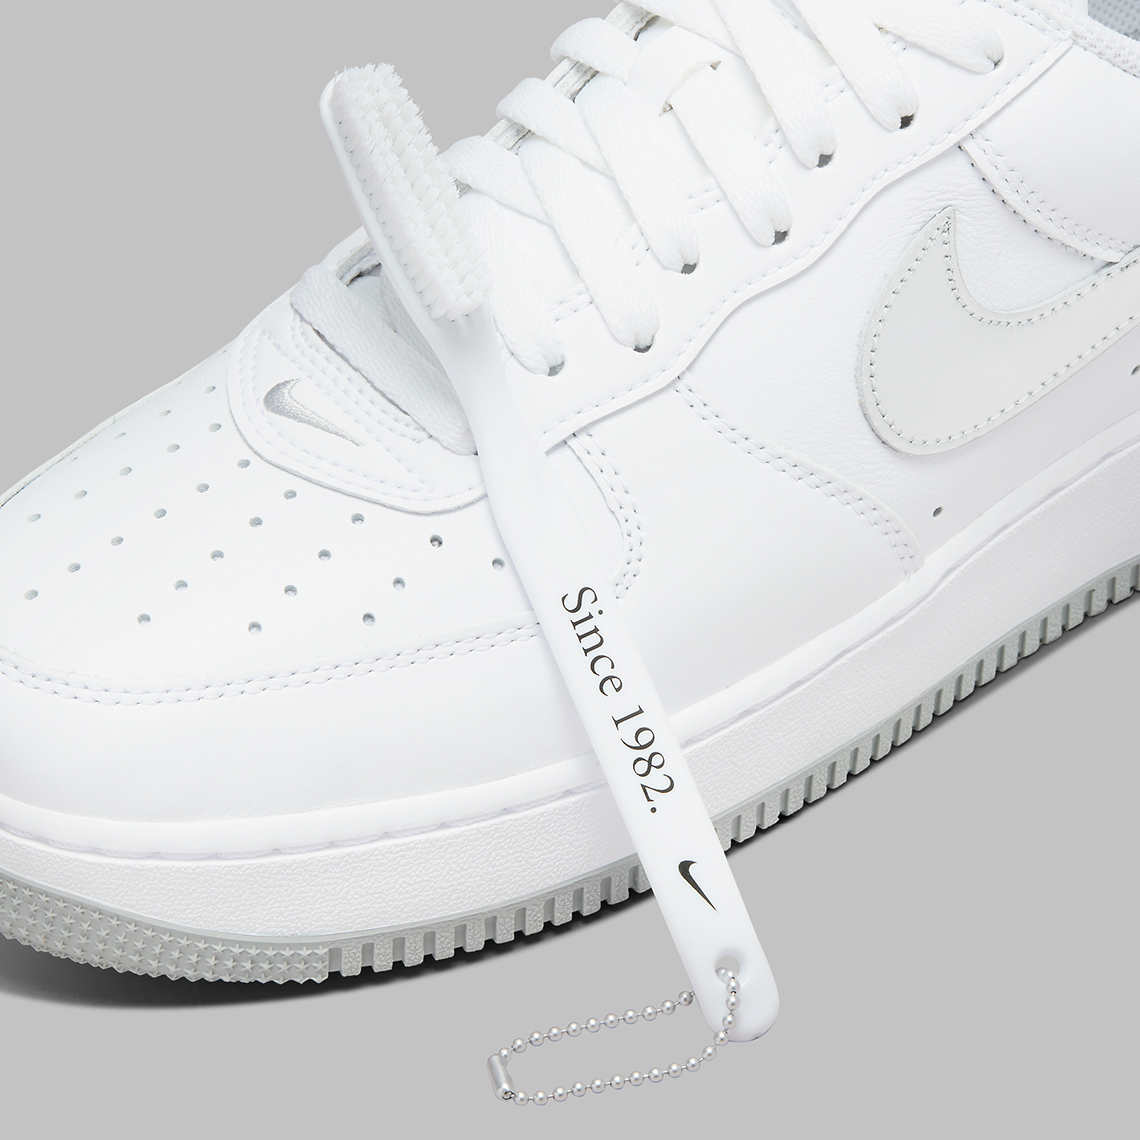 Nike Air Force 1 Low Color Of The Month Metallic Silver Dz6755 100 4